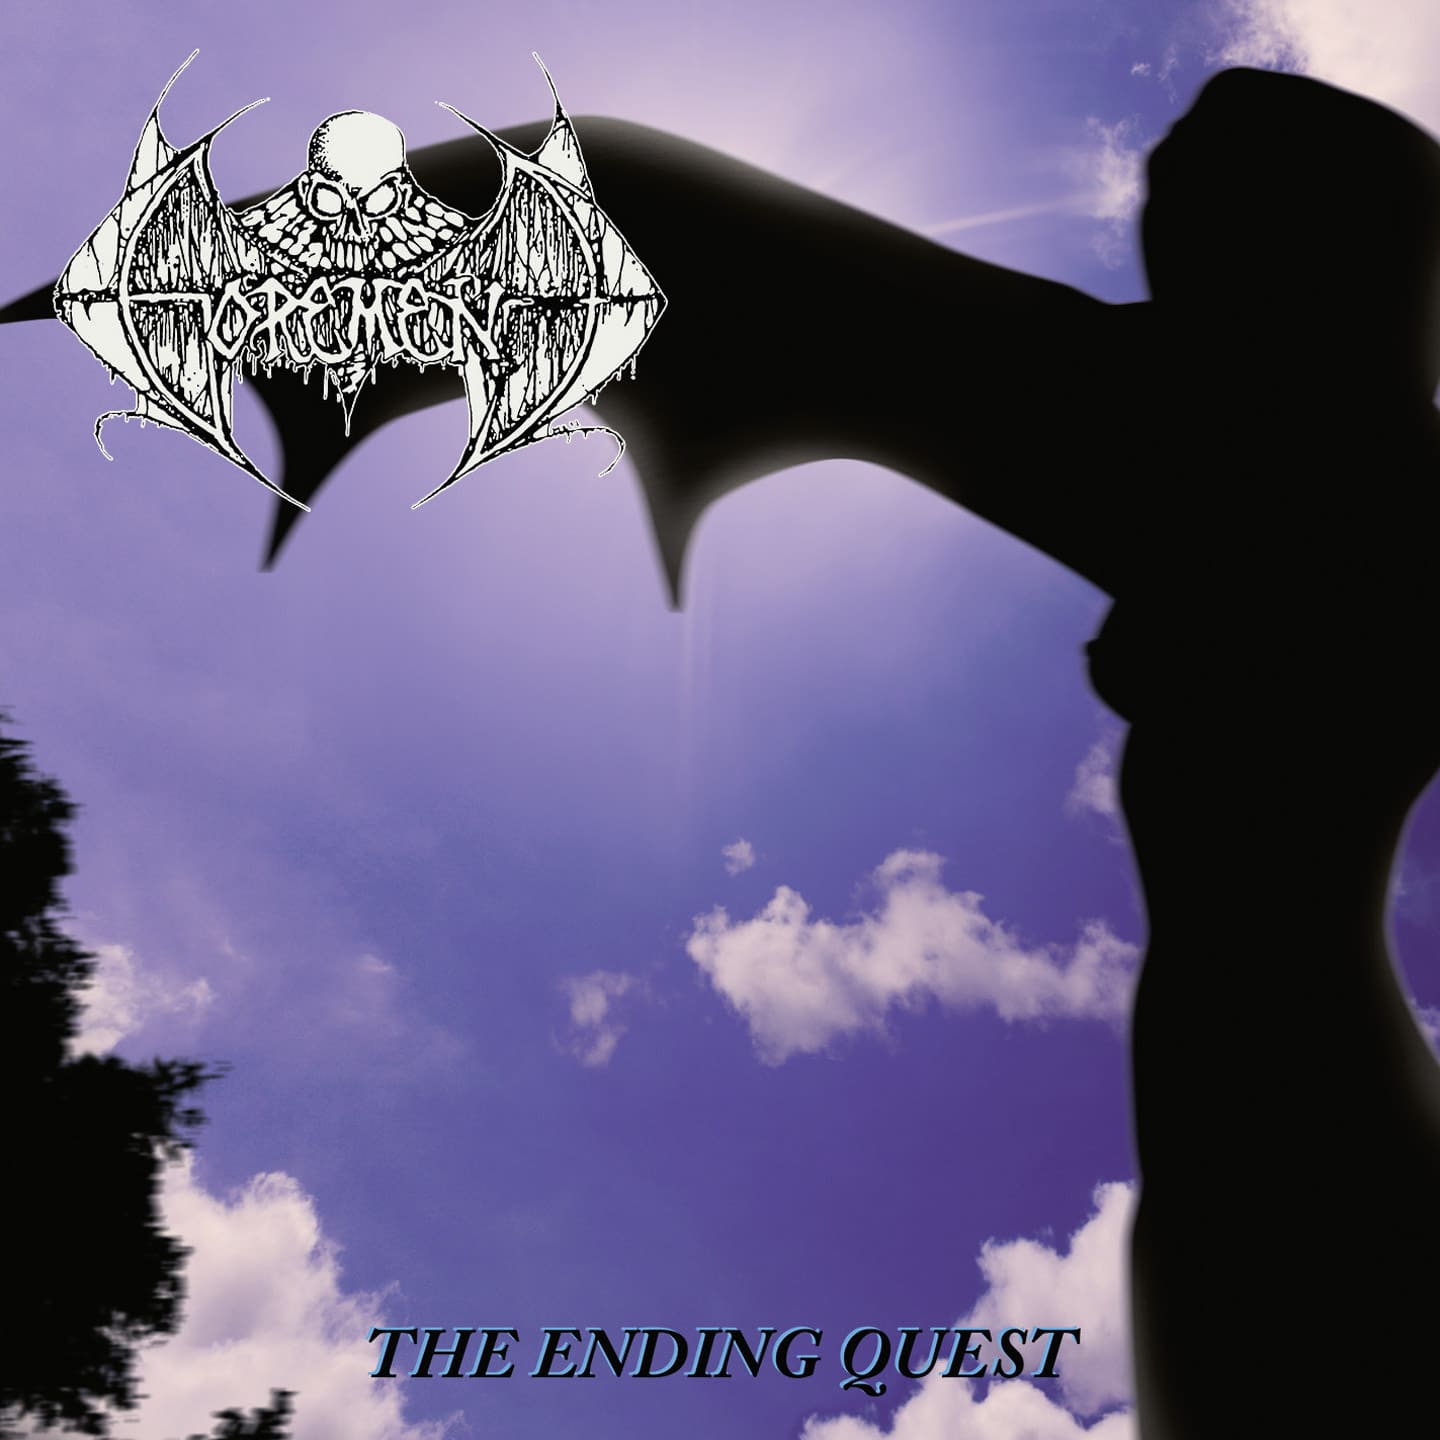 GOREMENT The Ending Quest (Re-issue) Ltd Digipack